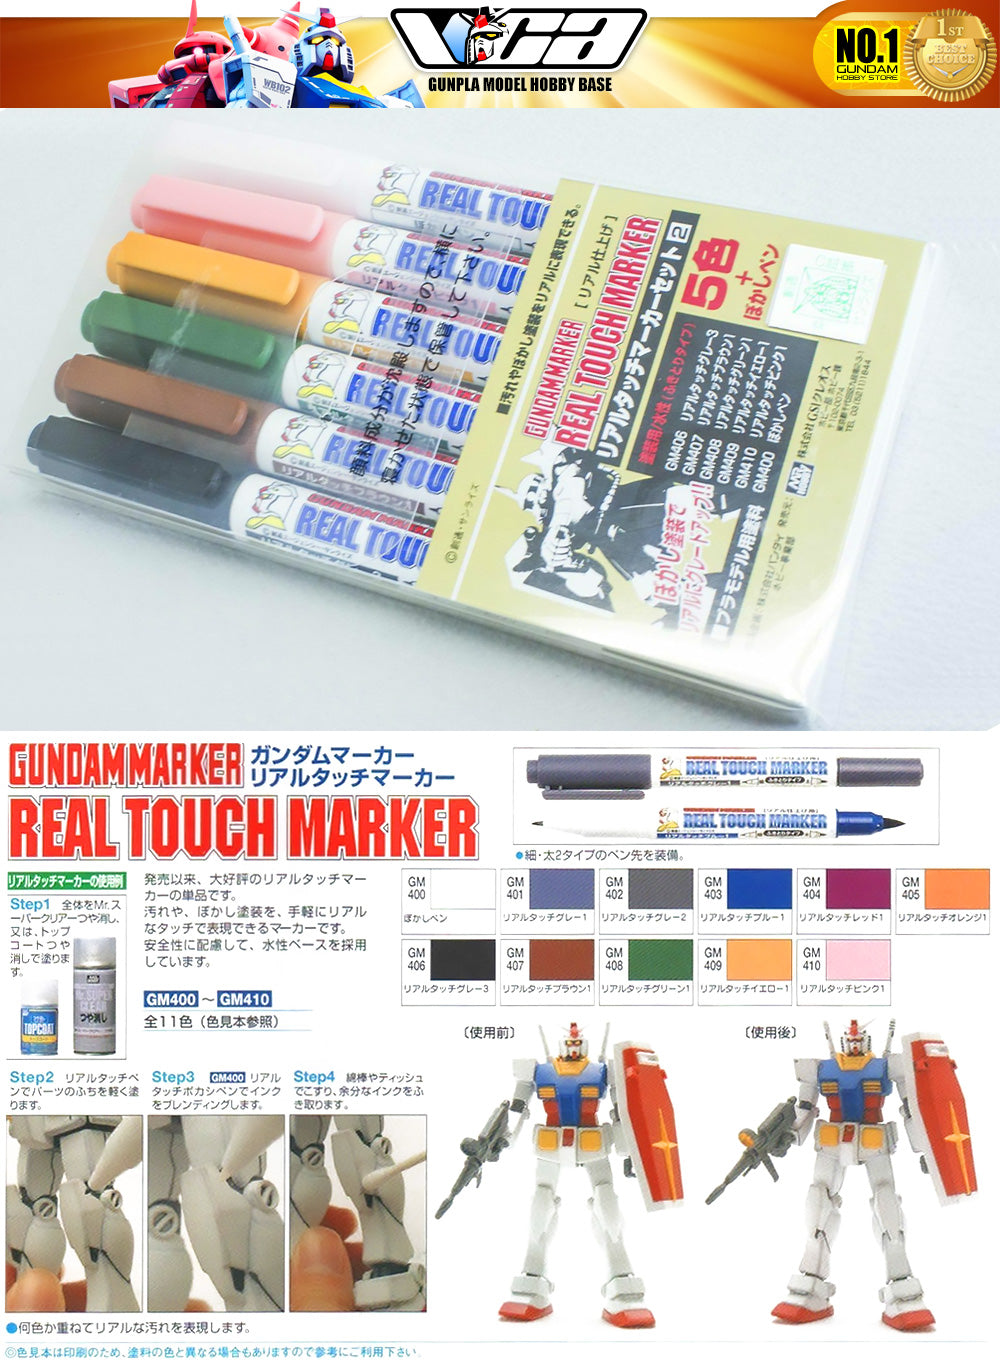 Gsi Creos Mr Hobby Gundam Real Touch Marker Weathering Effect Pen VCA Singapore